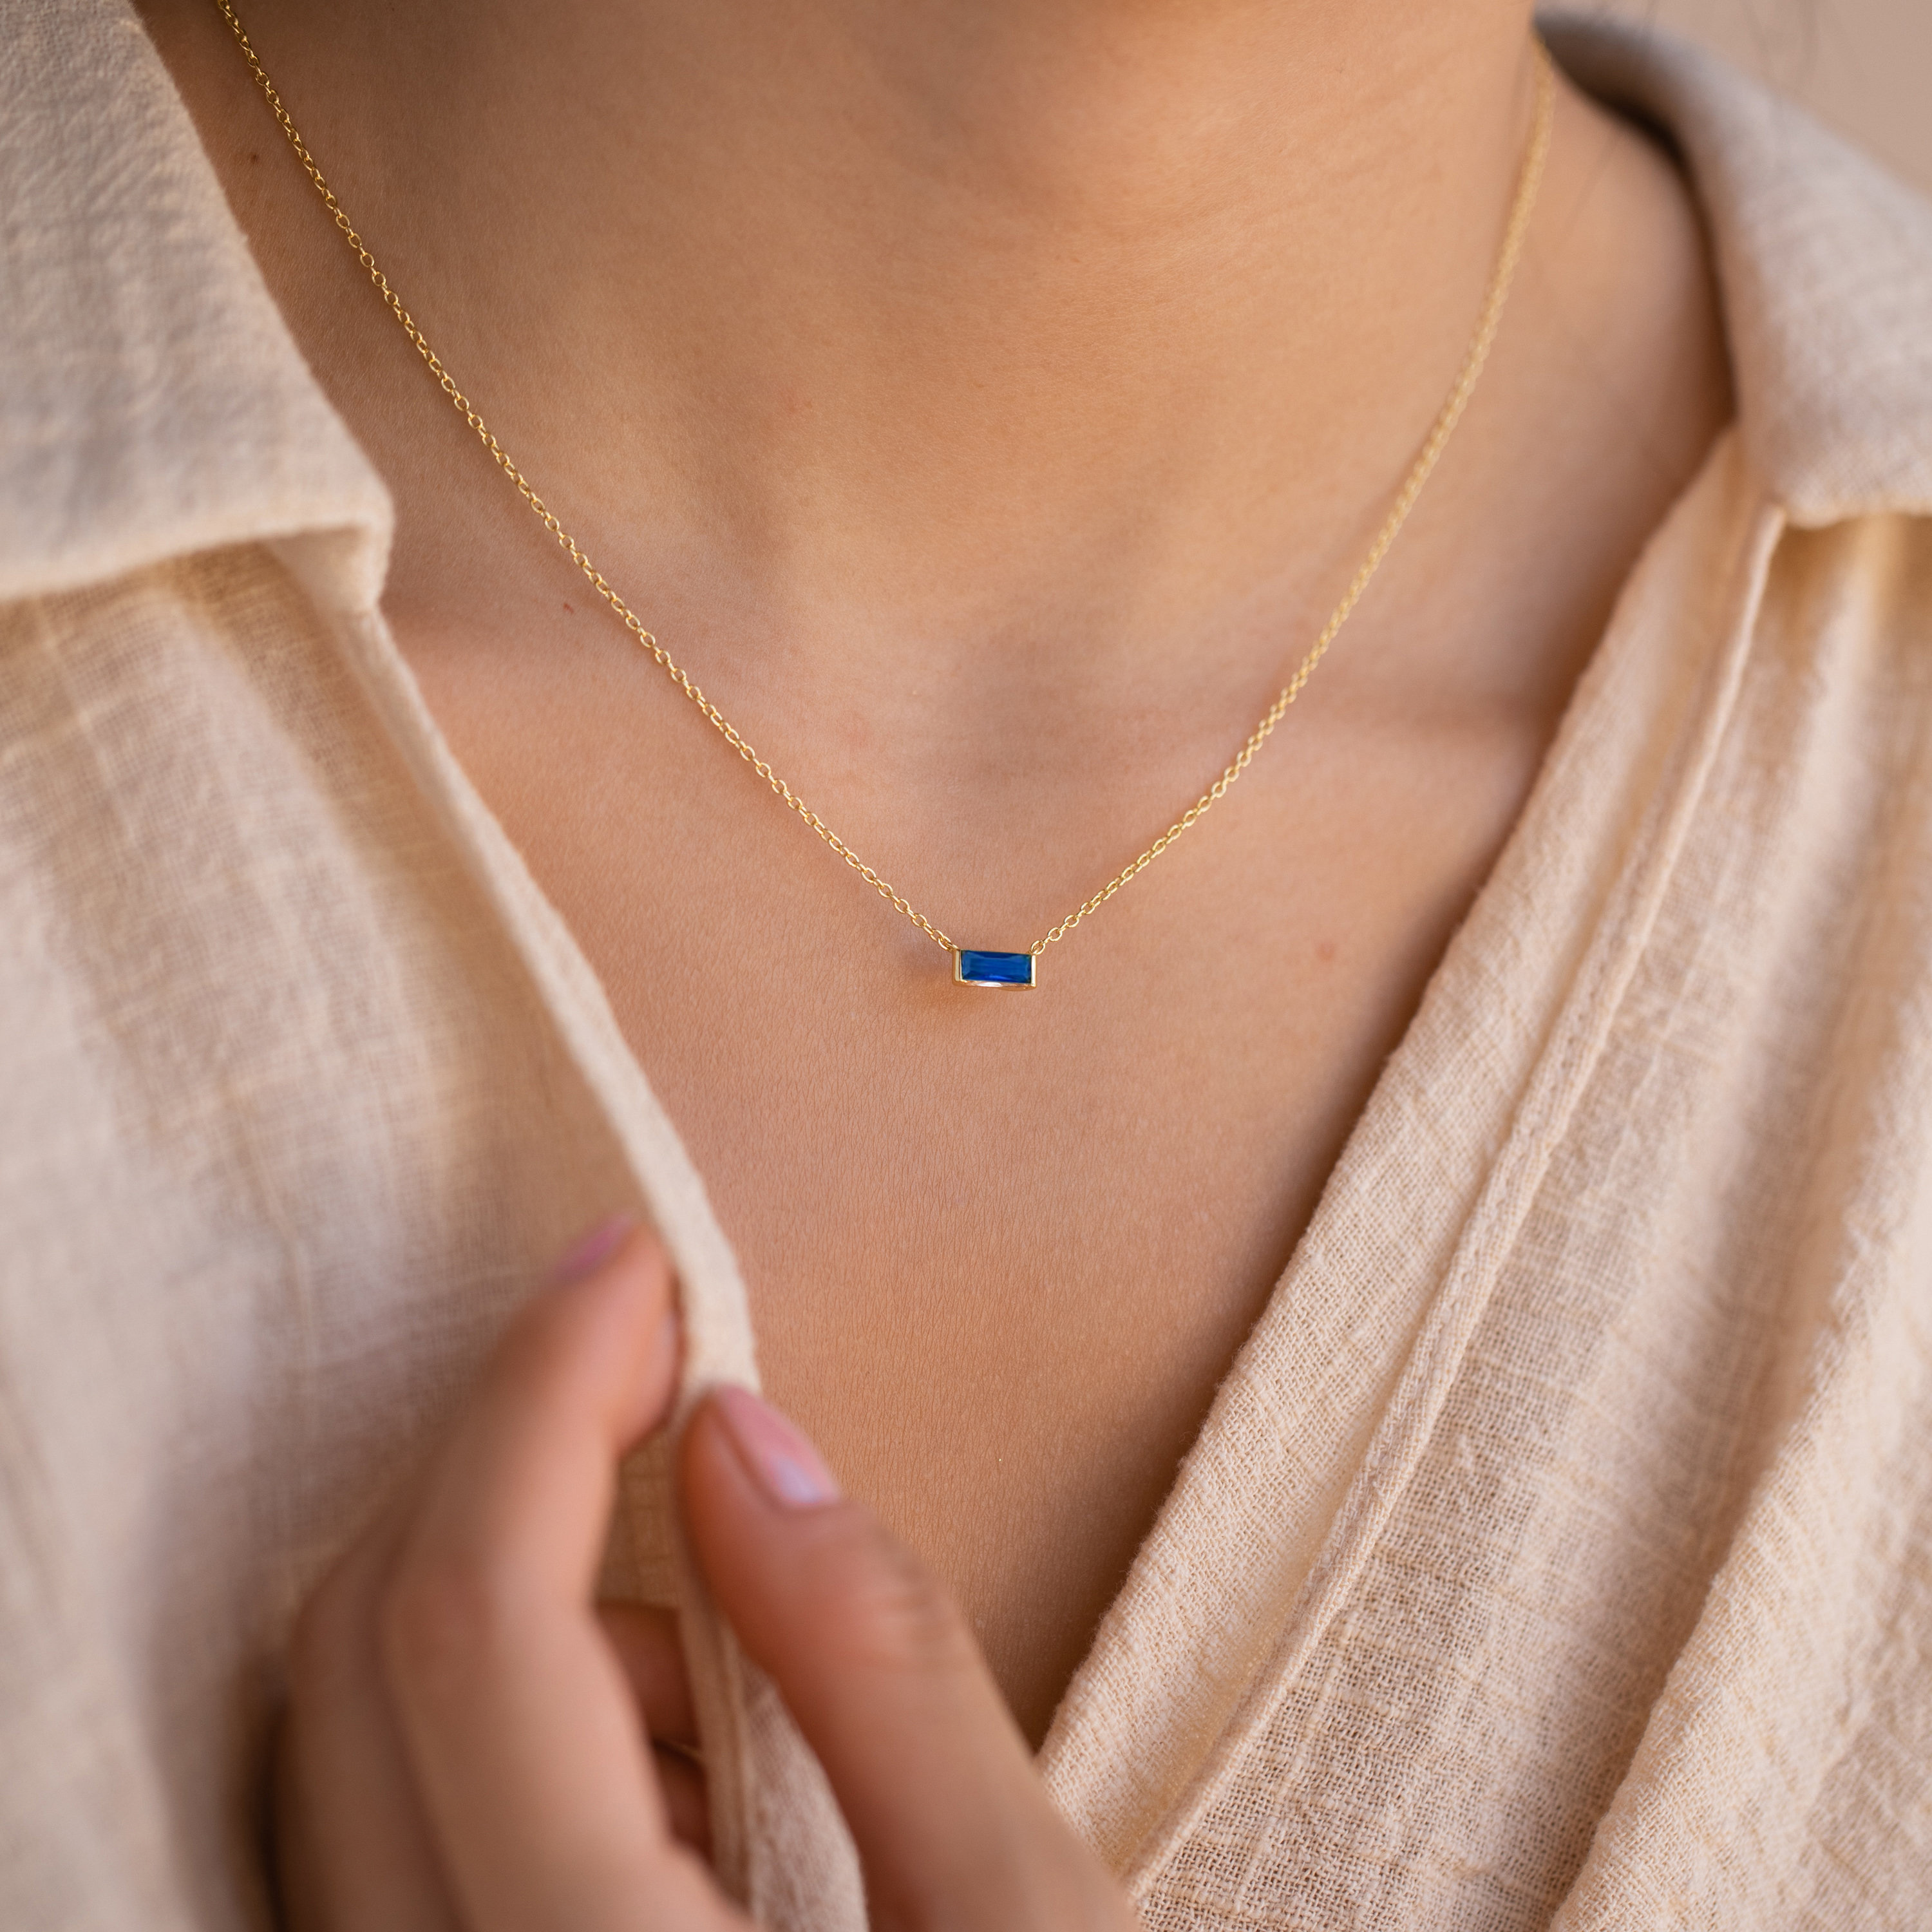 Blue Sapphire Necklace Minimalistic Necklace Jewelry Gifts 